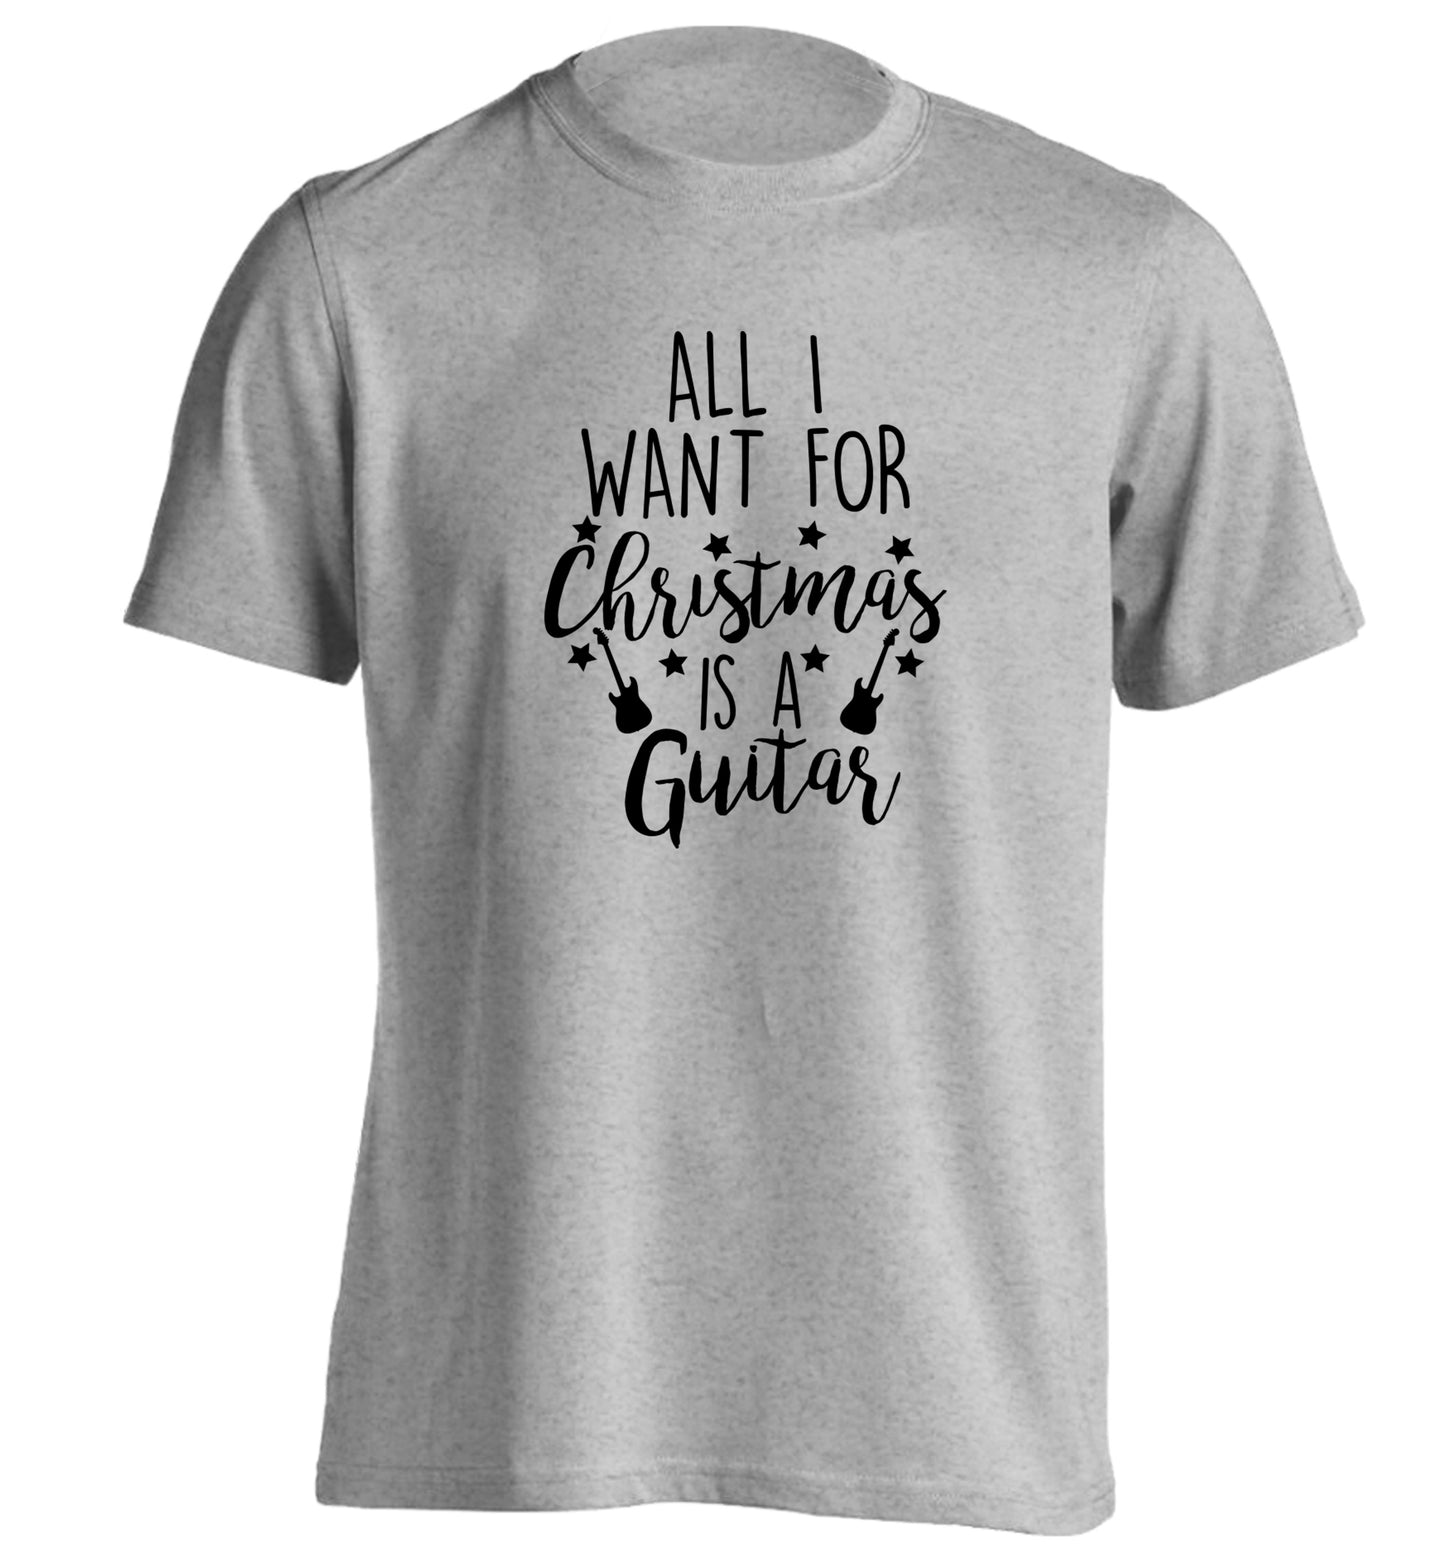 All I want for Christmas is a guitar adults unisex grey Tshirt 2XL